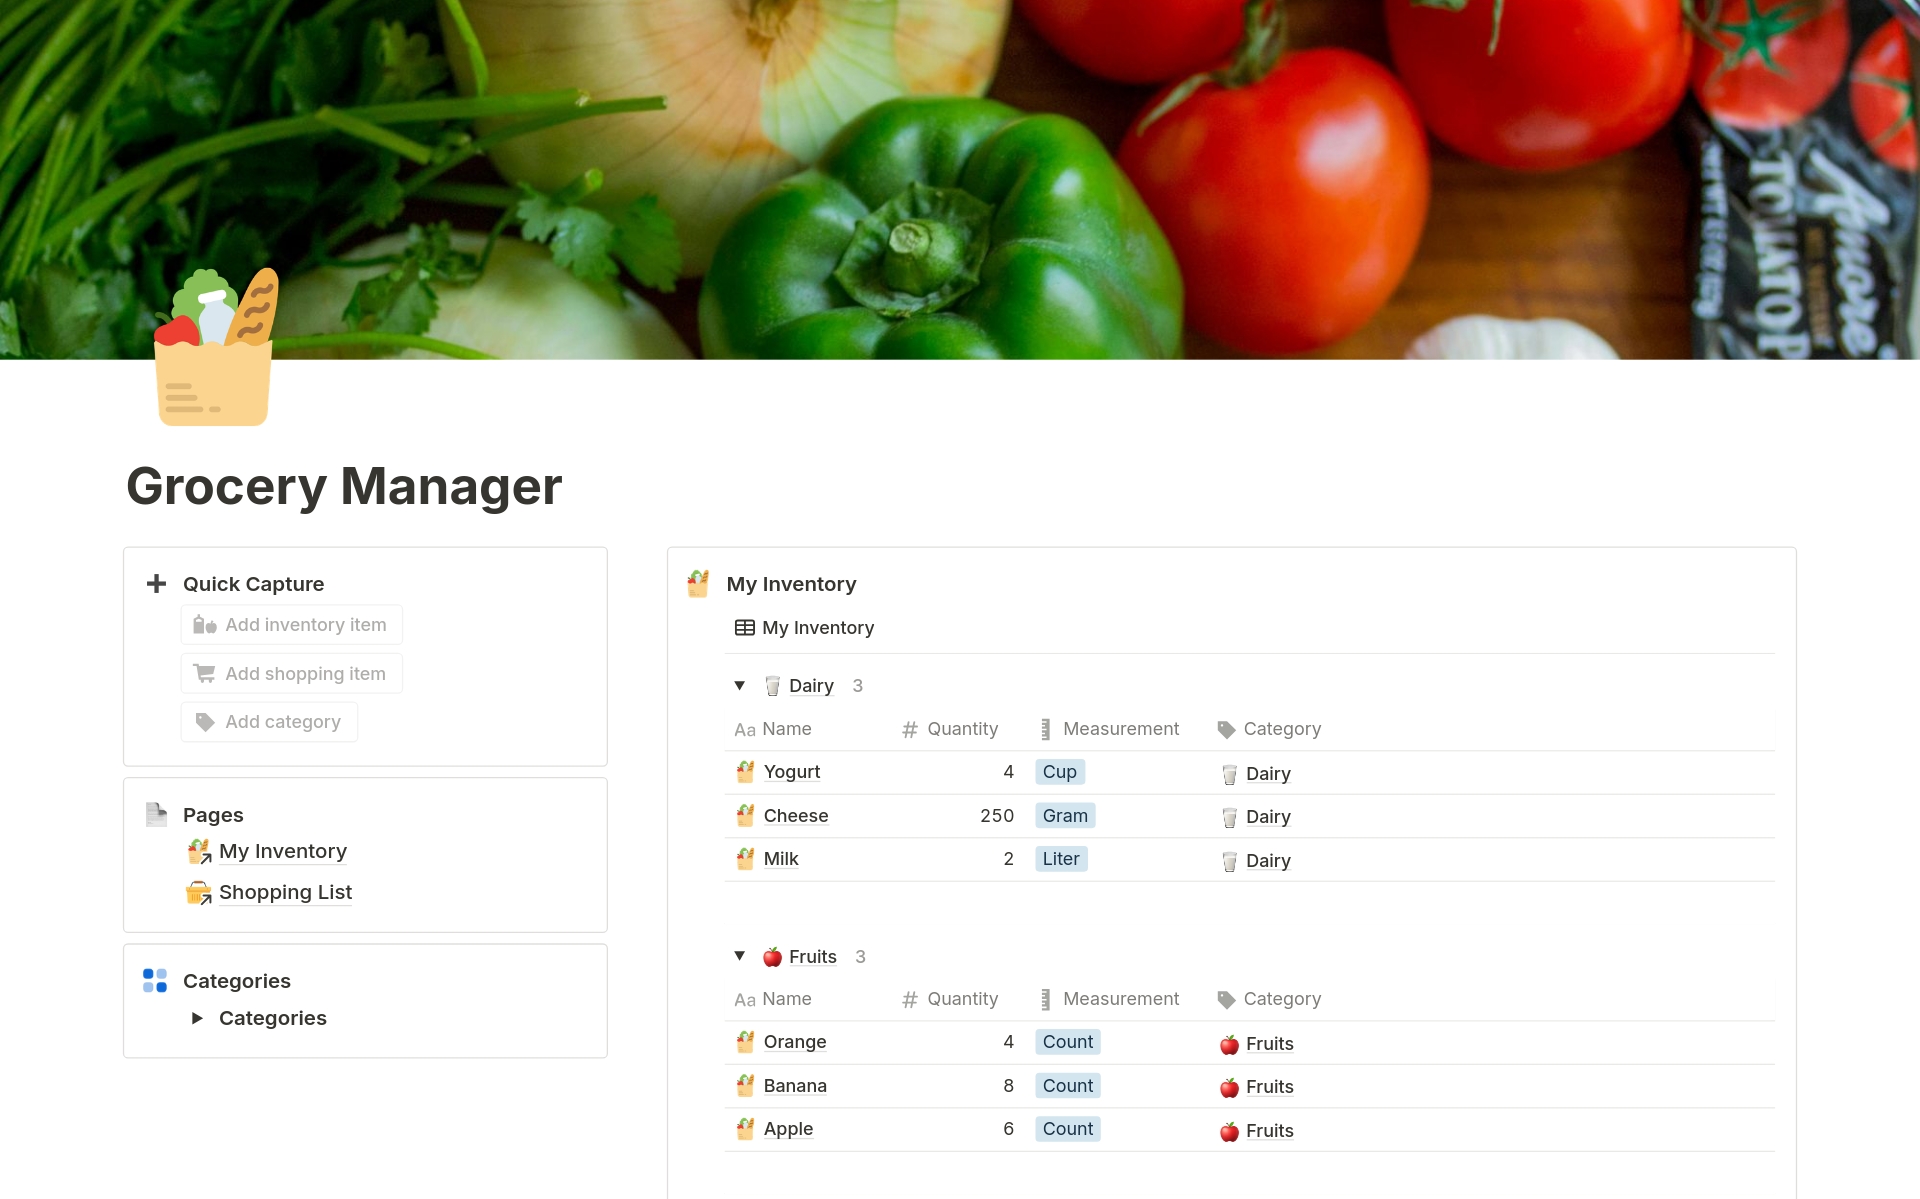 Stay stocked, stay organized with Grocery Manager!